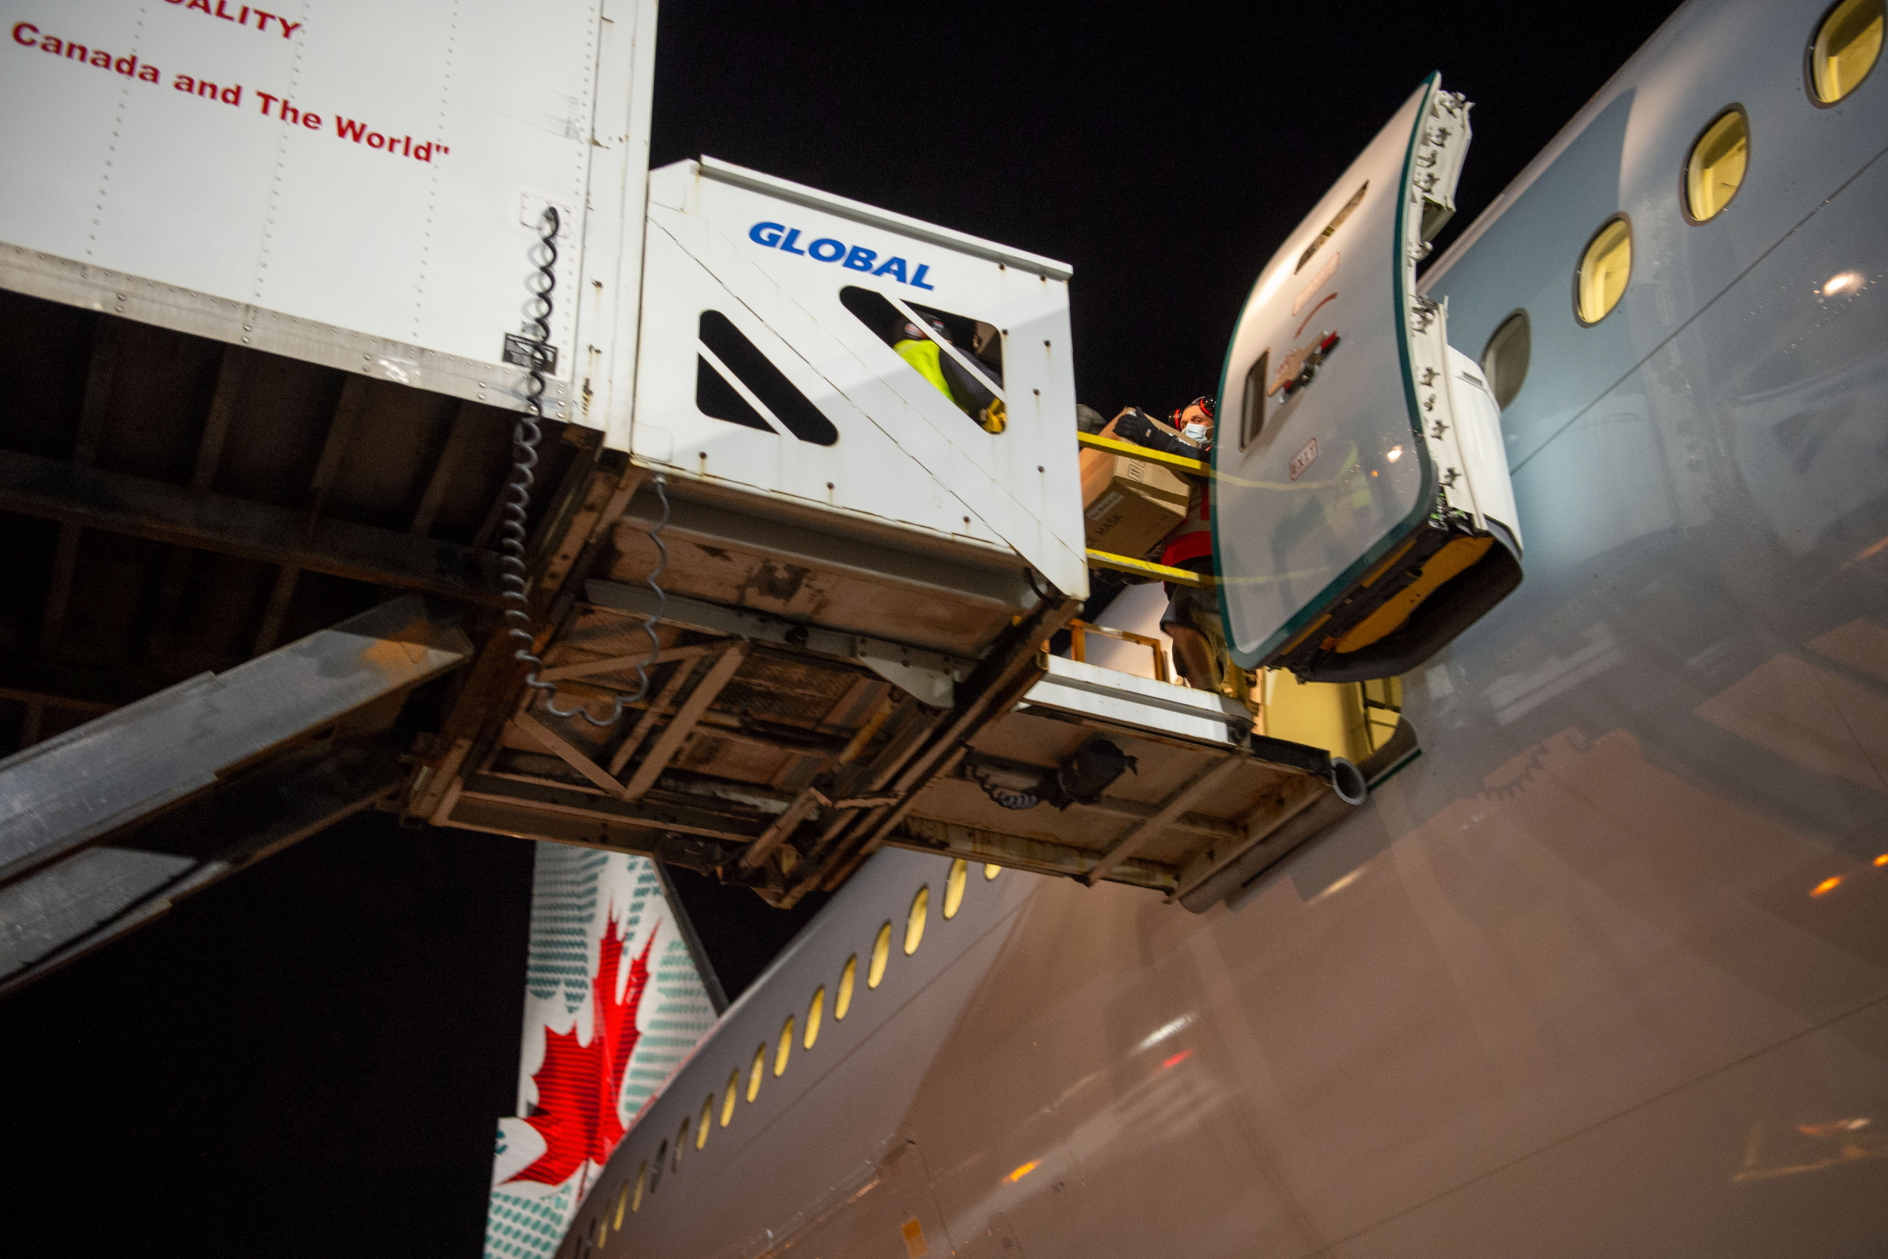 Air Canada is currently upragding and expanding its cargo operations. Click to enlarge.